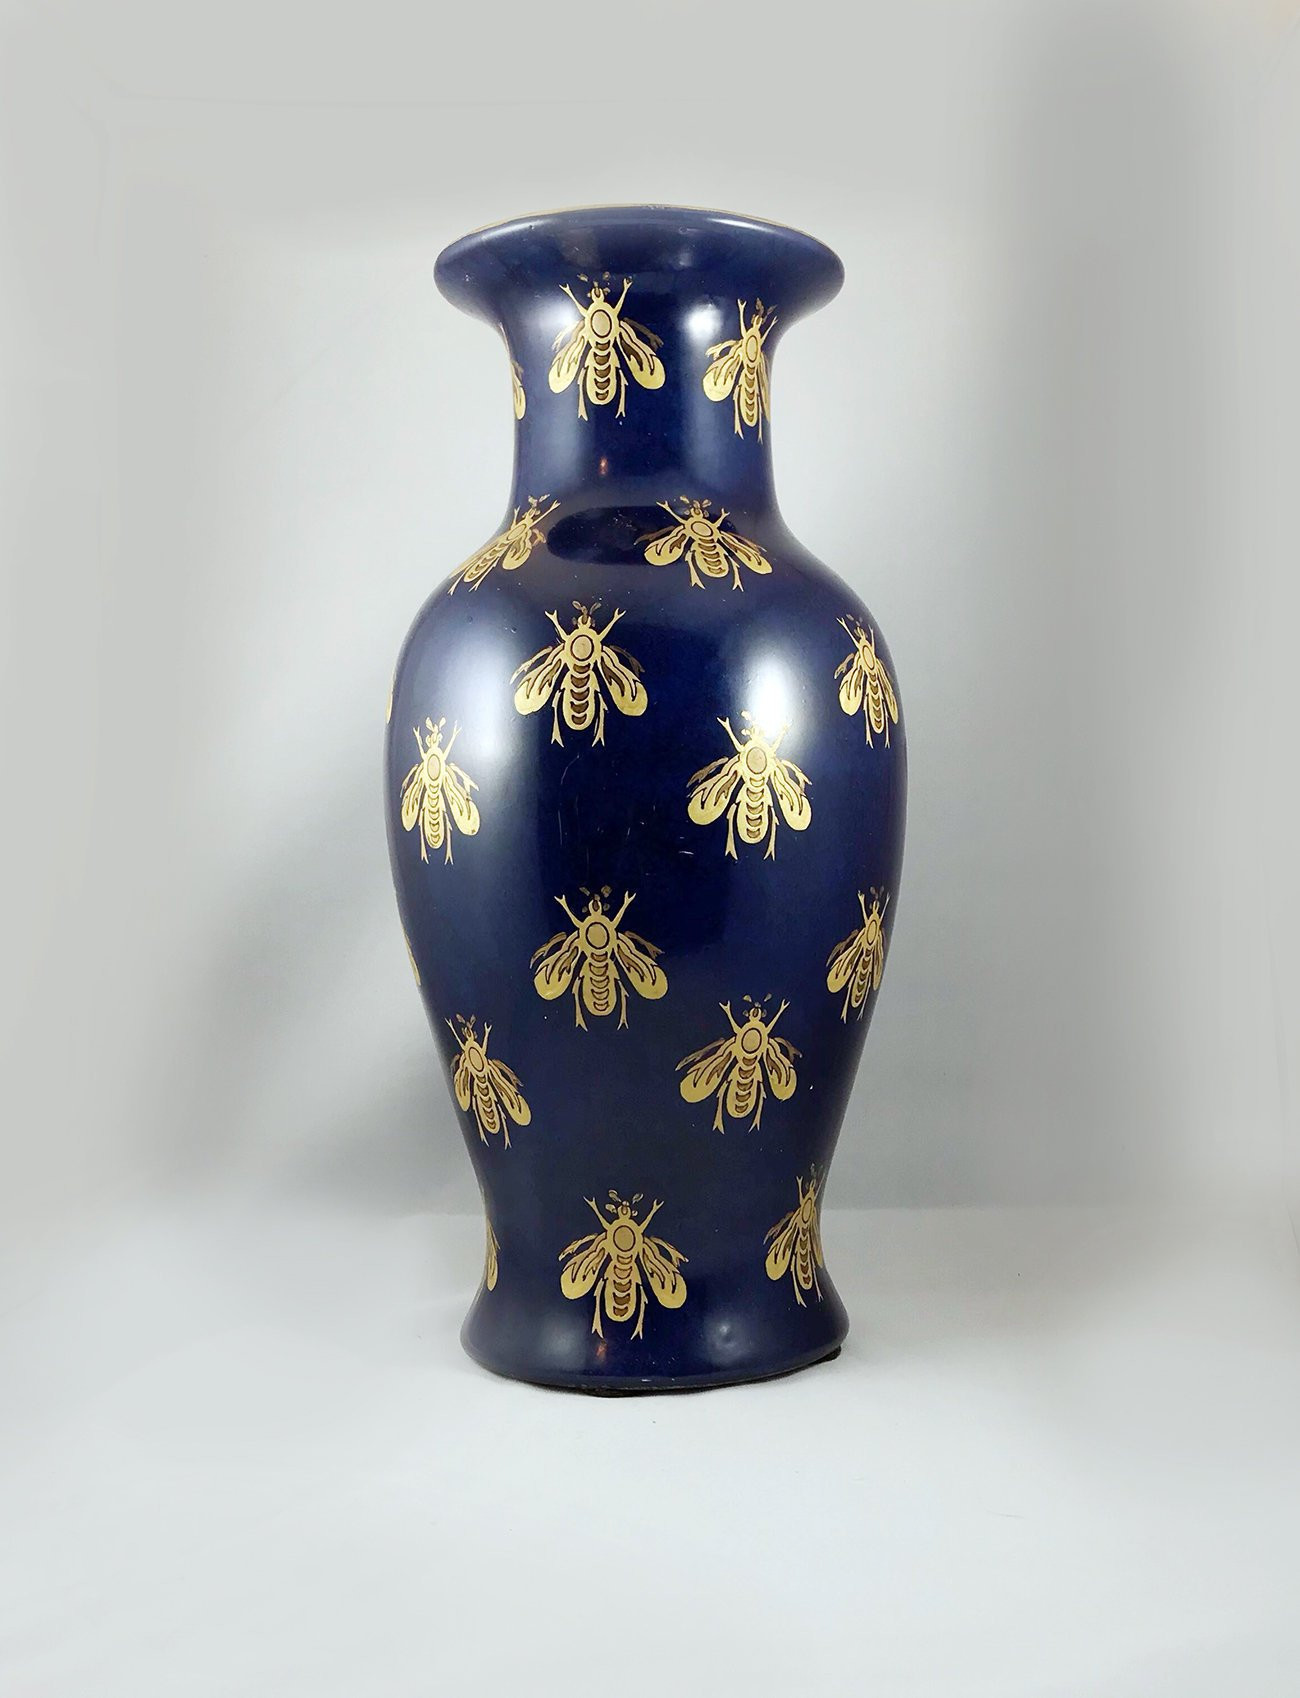 20 Fabulous Chinese Porcelain Vases for Sale 2023 free download chinese porcelain vases for sale of royal blue flower vase with golden hand painted bumble bees etsy for dc29fc294c28ezoom